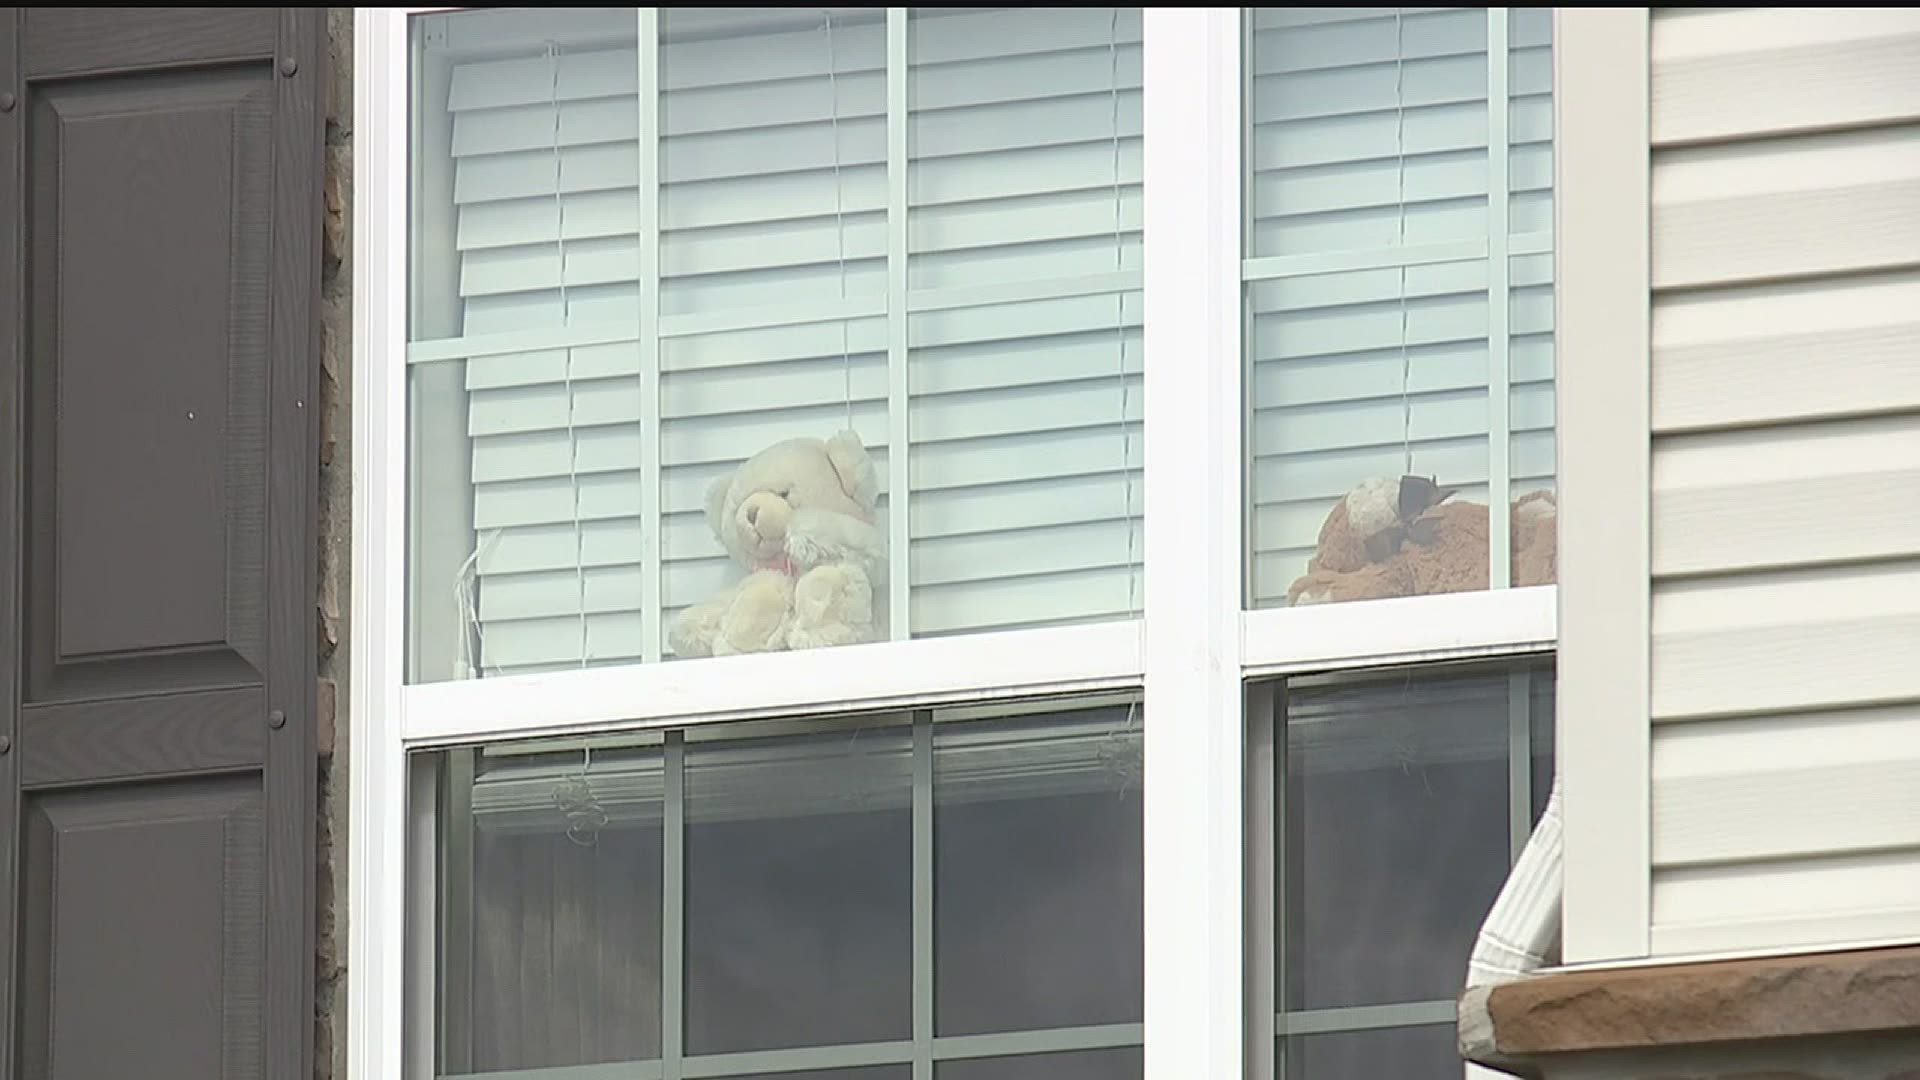 Neighbors are hiding teddy bears in windows to give kids something to find